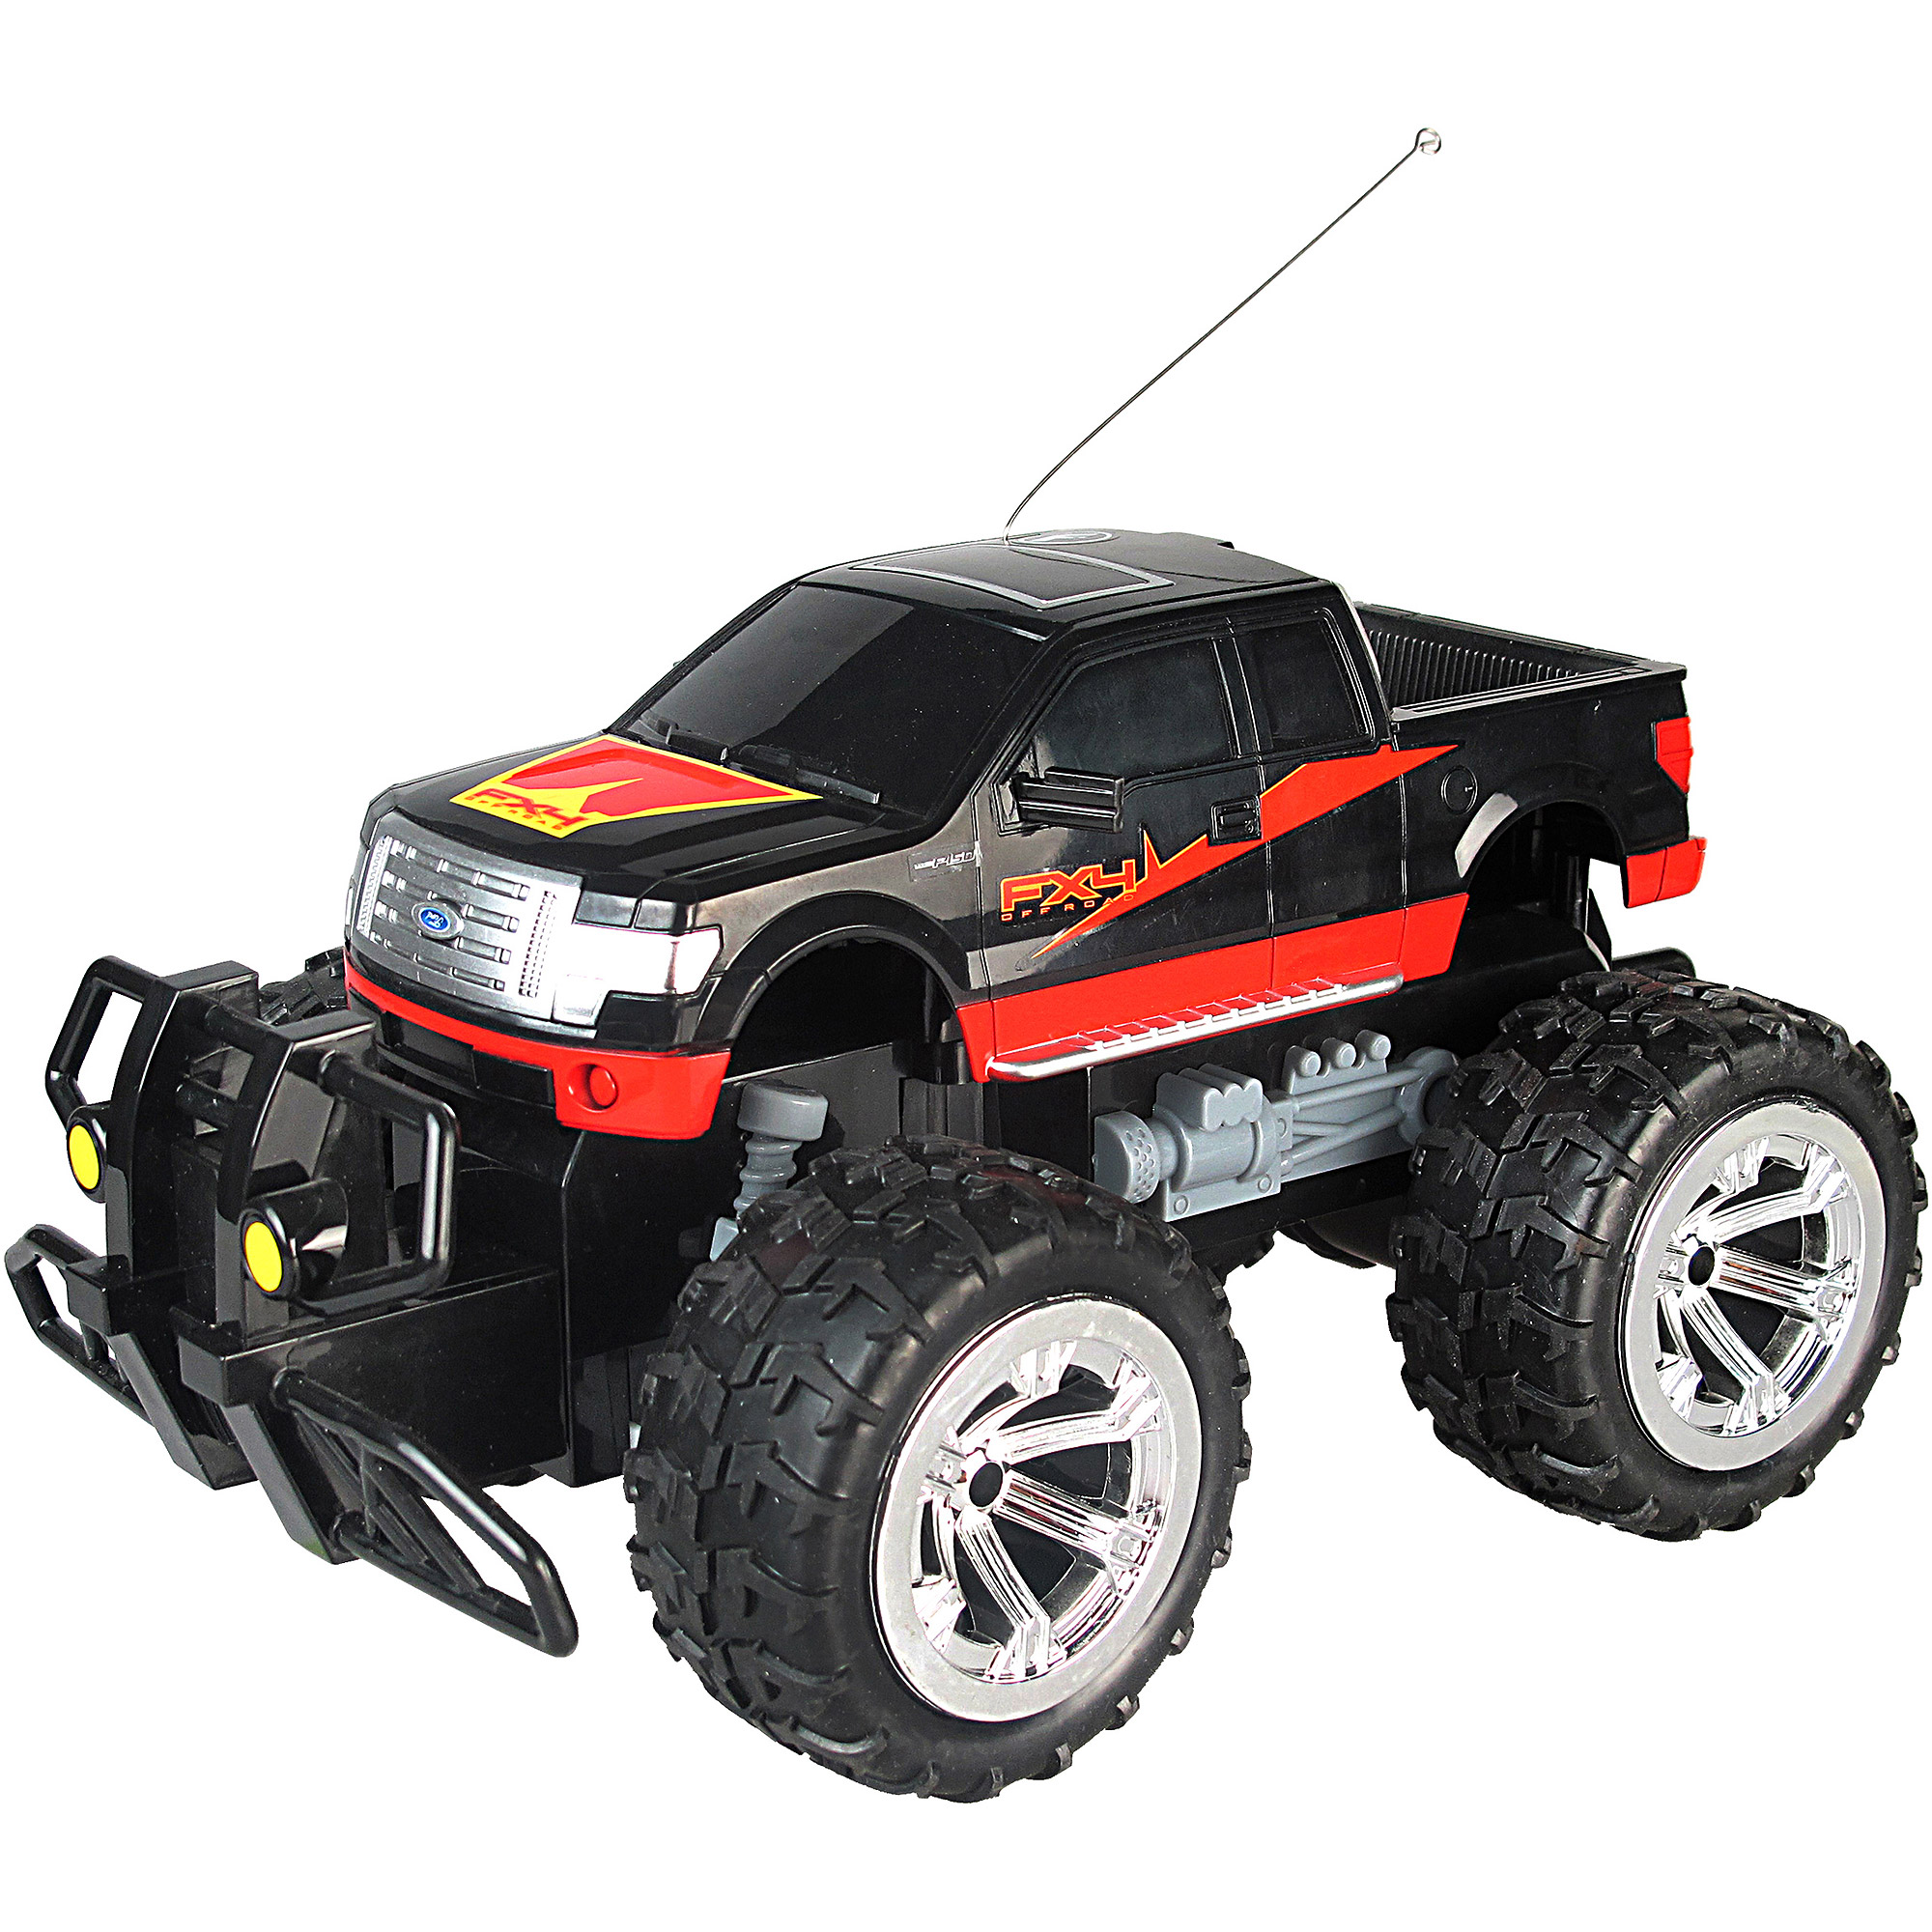 Auldey RC 1:18 Full-Function Truck - image 1 of 2